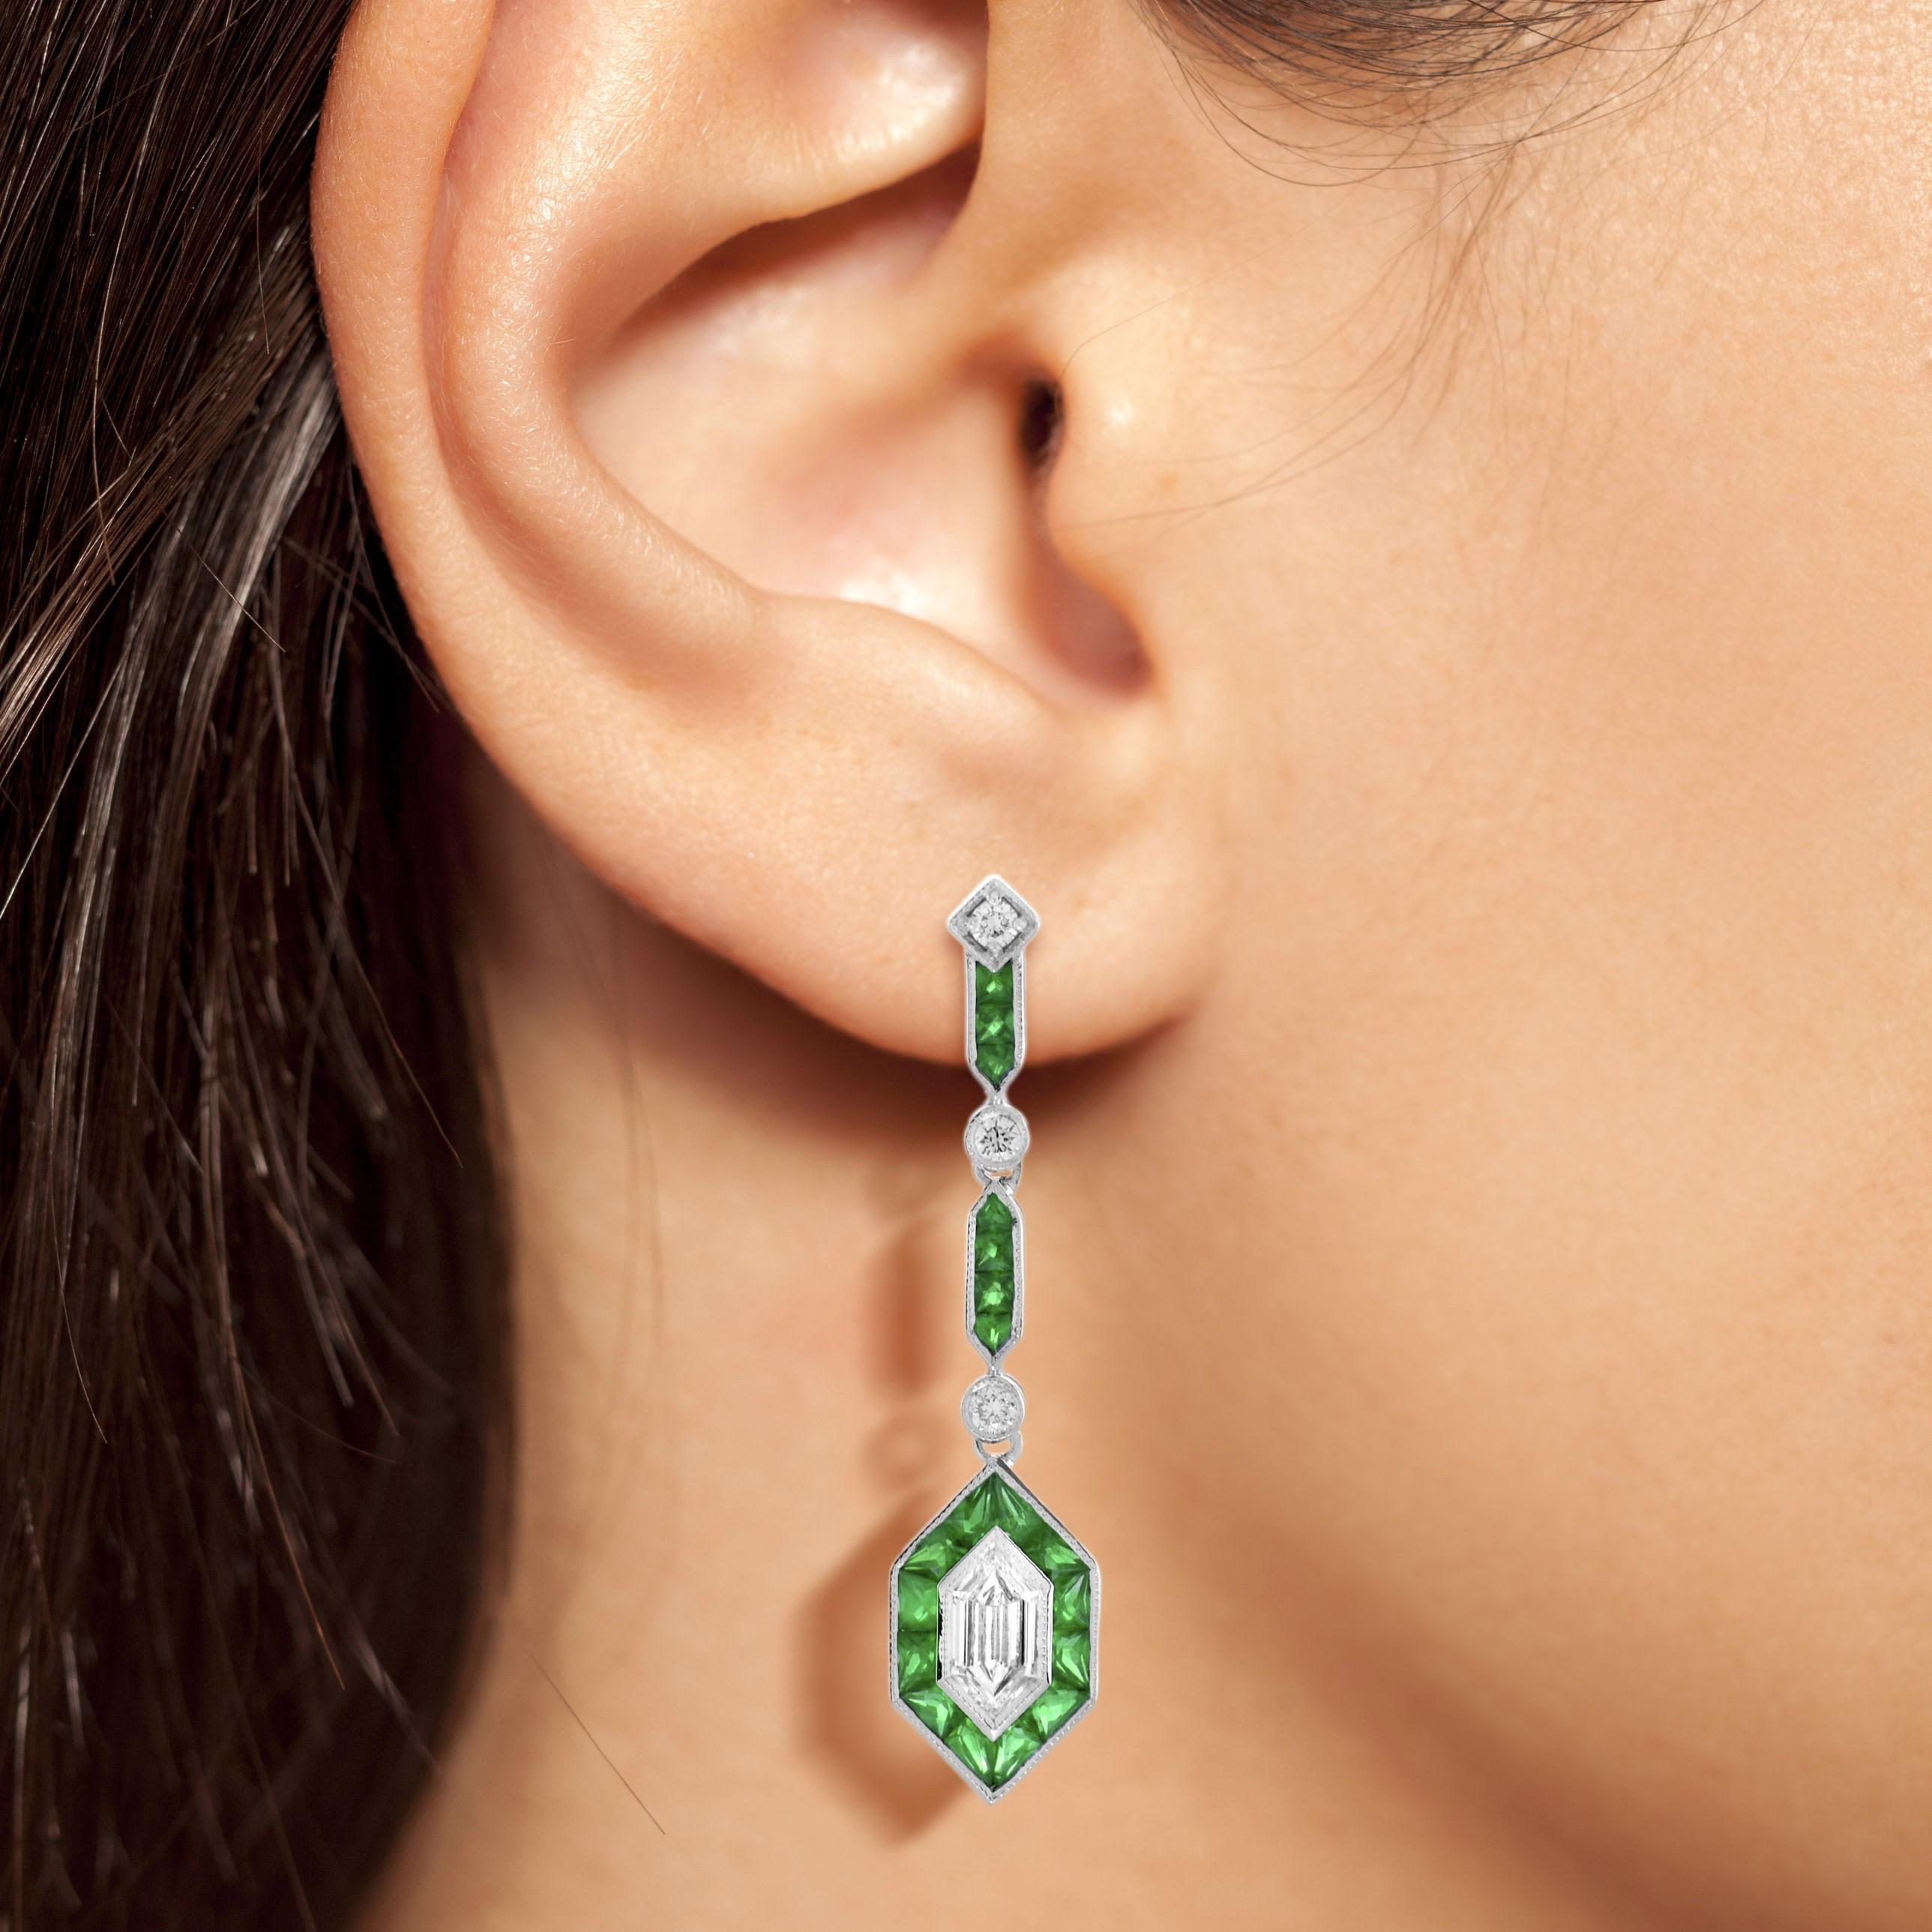 These Art Deco inspired drop earrings features 0.96 carats of total diamonds and 3.75 emerald  finished in a dazzling 18k white gold setting. Both glamorous and imaginative, these drop earrings could be the show stopper addition to your jewelry